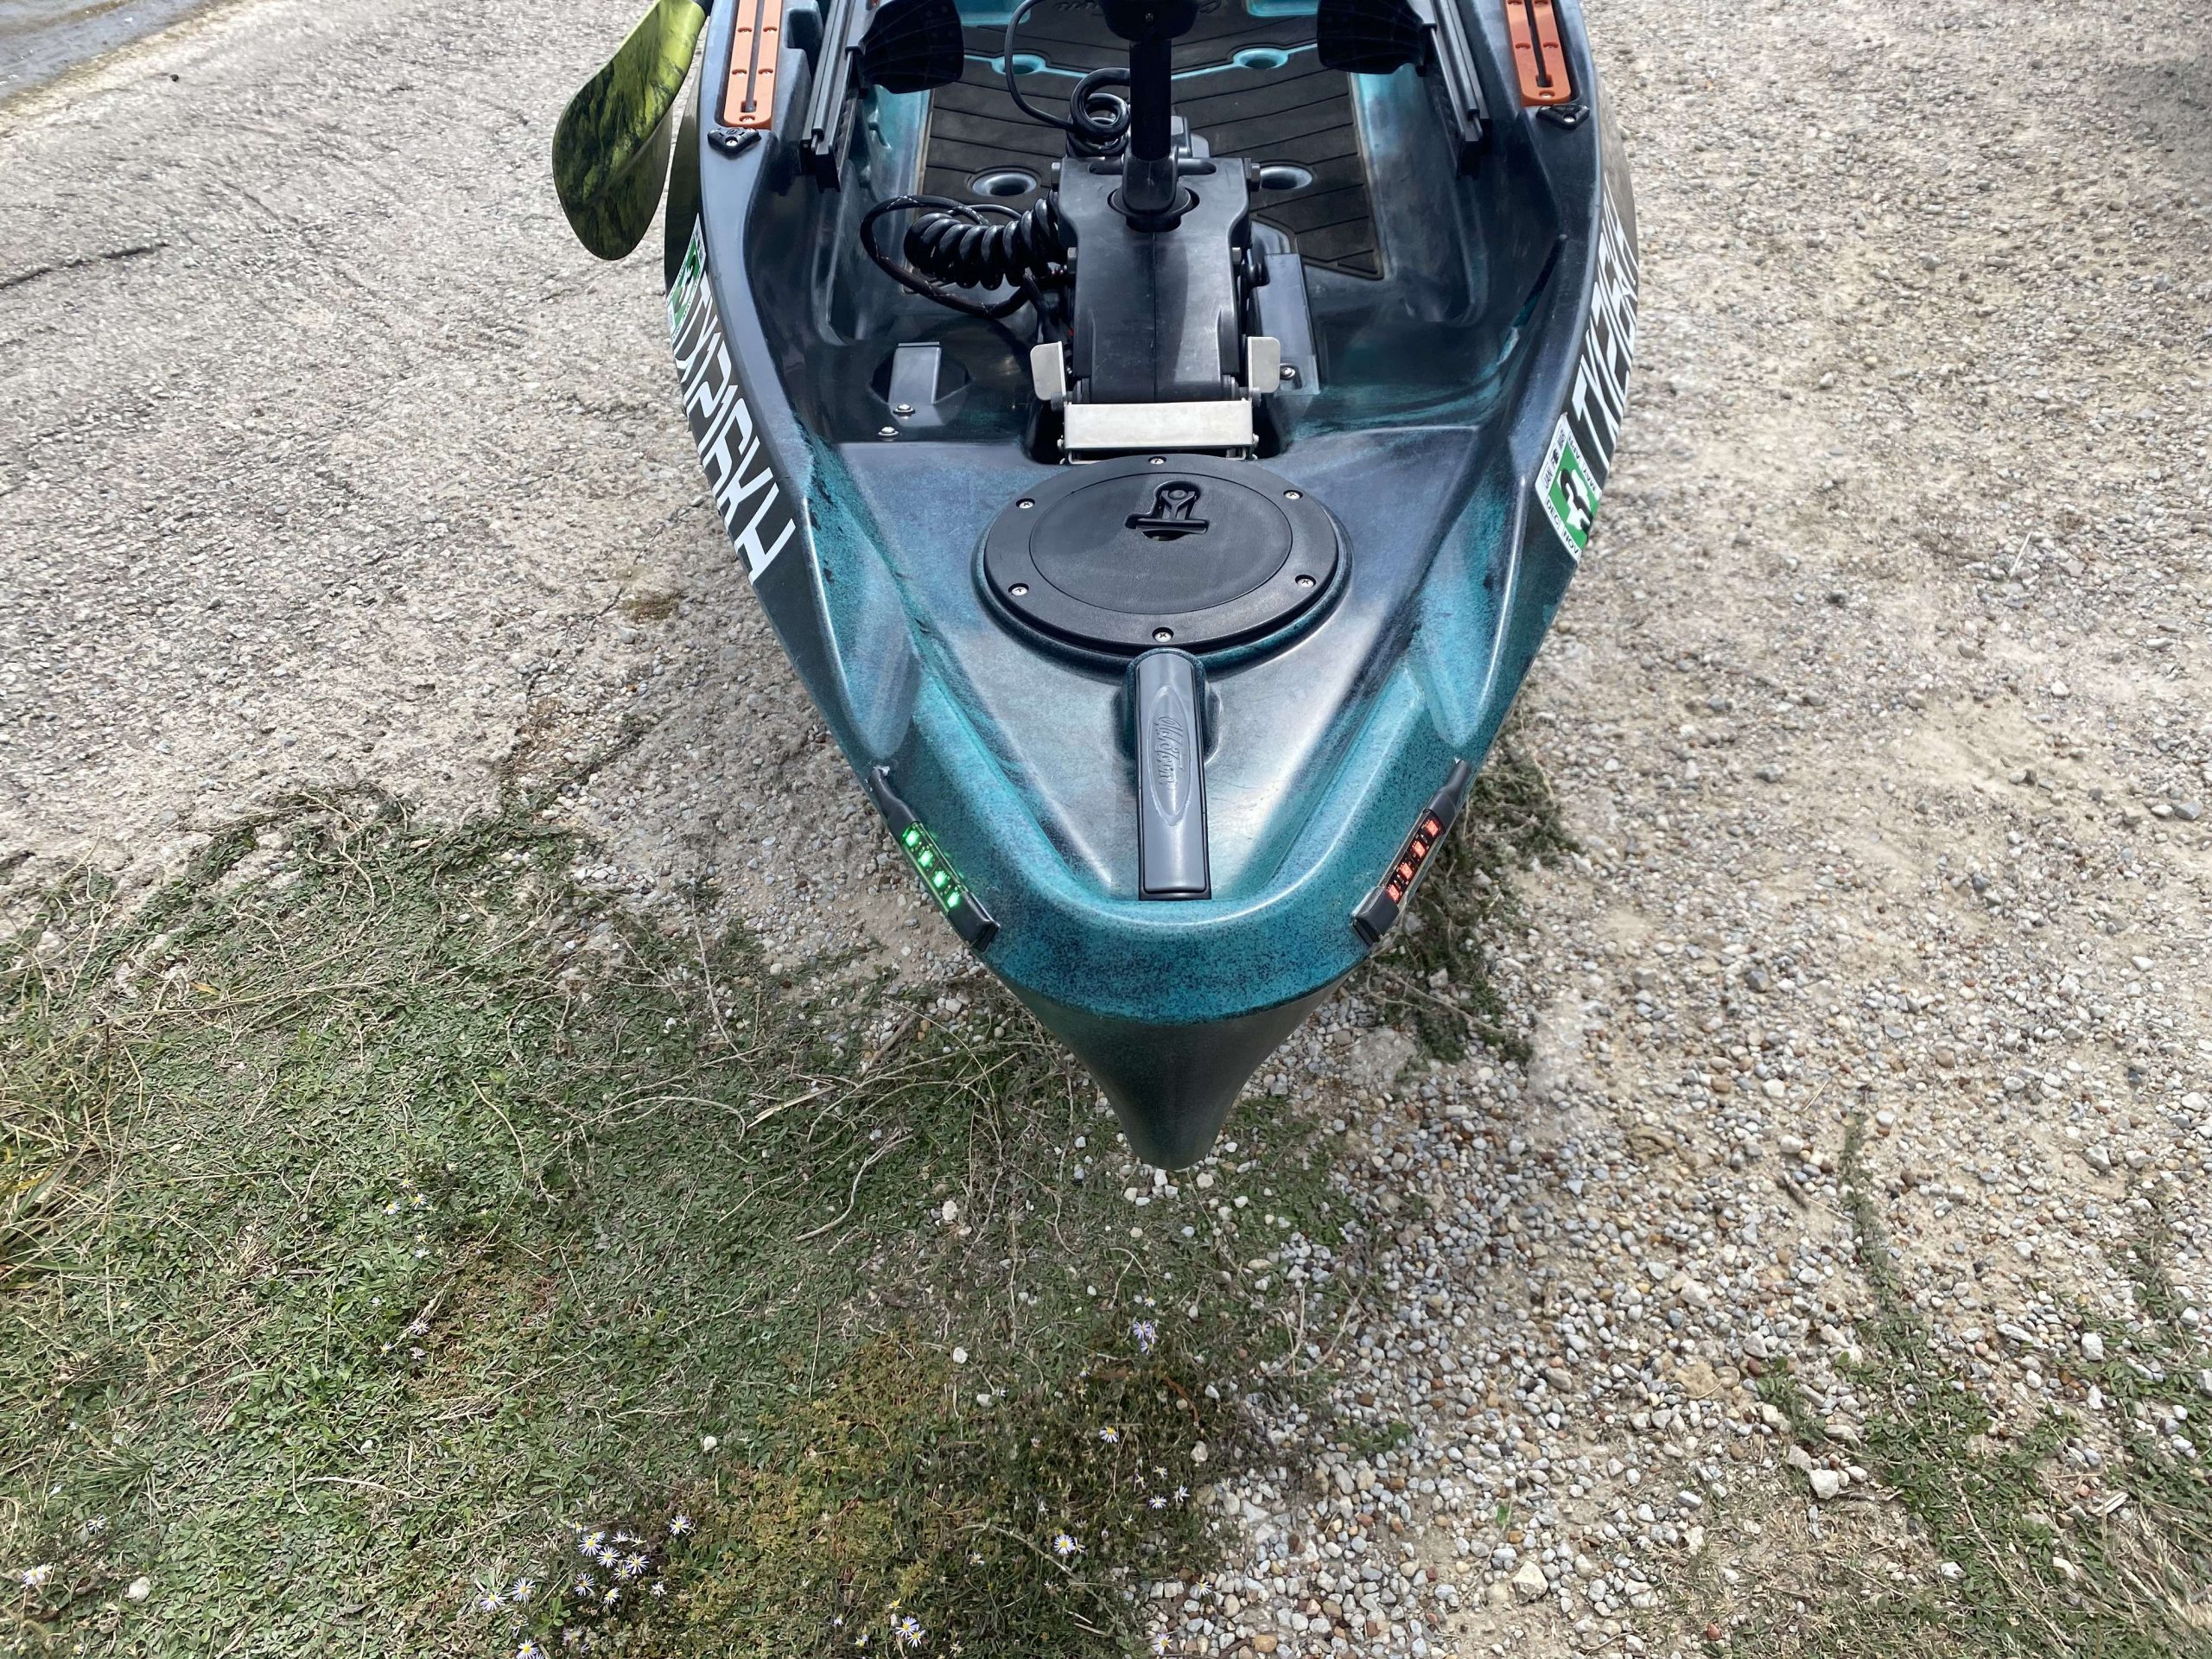 Pendergraf's Auto Pilot 120 kayak is spacious enough to hold a large amount of his gear during tournaments. 